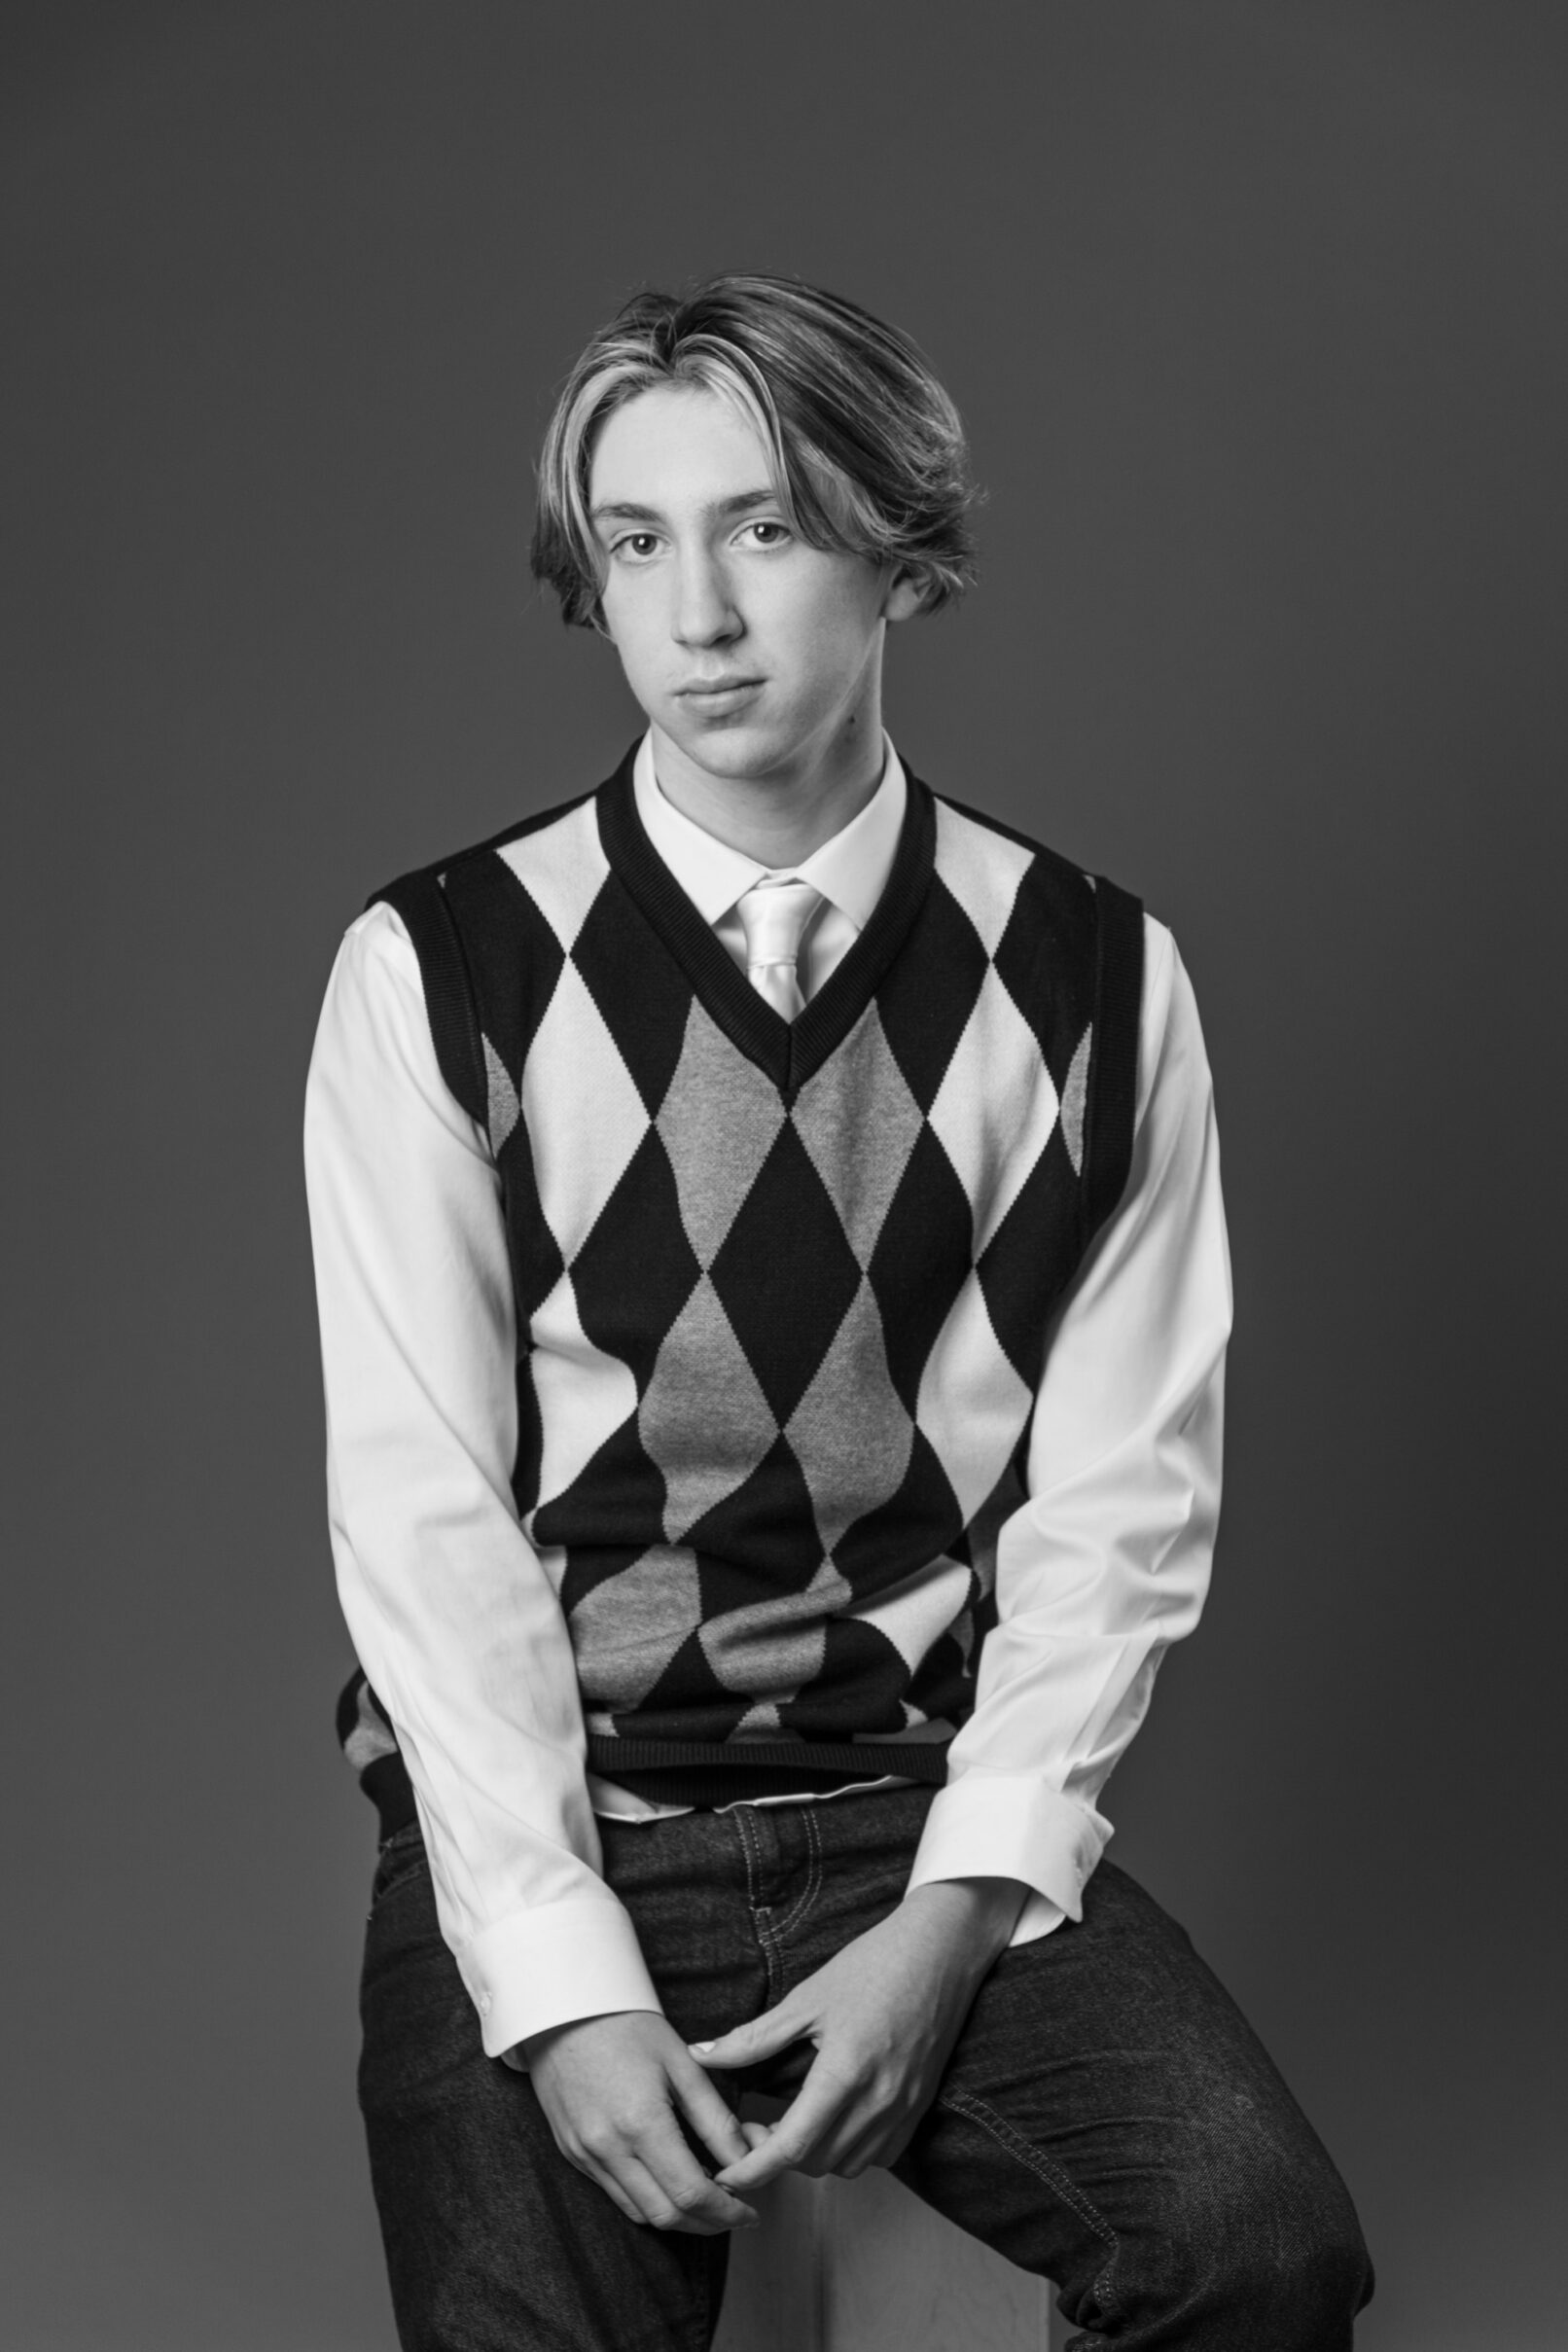 black and white portrait of a teenager wearing a sweater vest white shirt with tie and jeans posing on a stool.